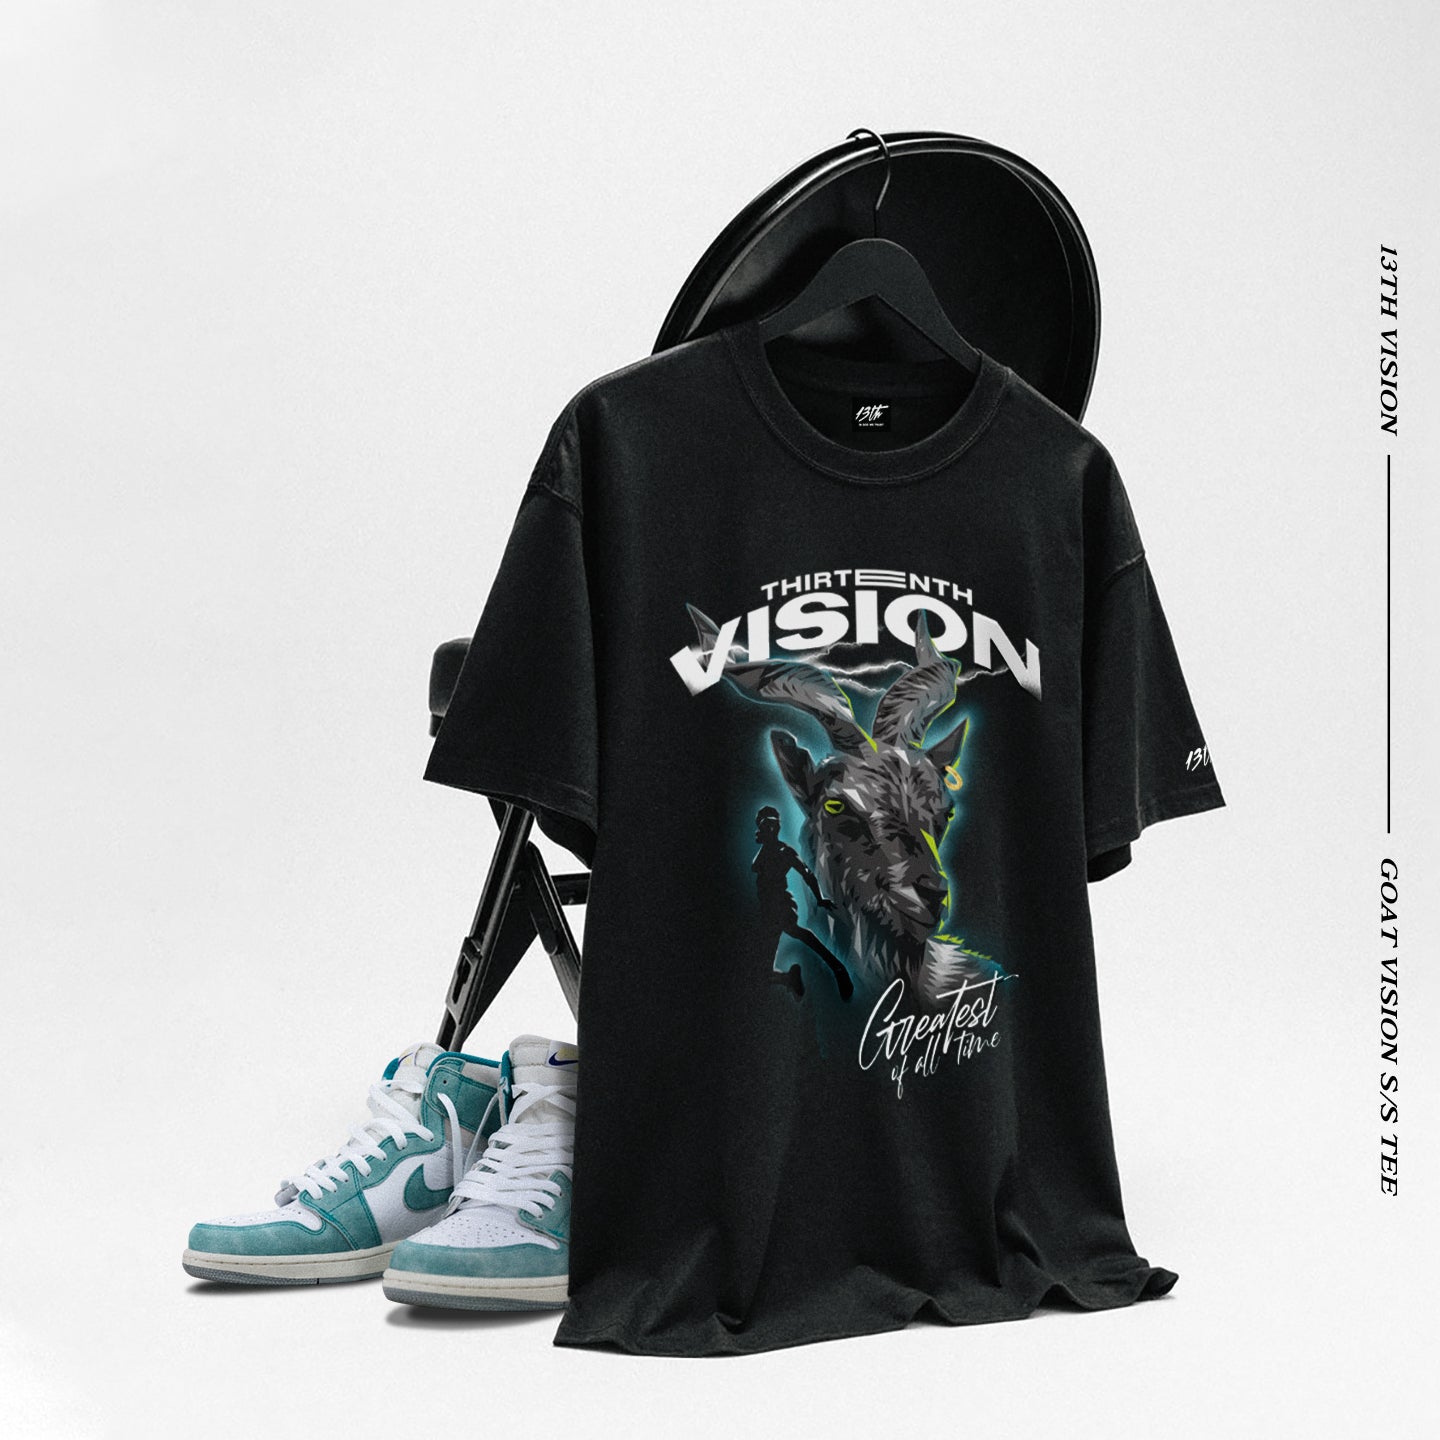 GOAT VISION Tee